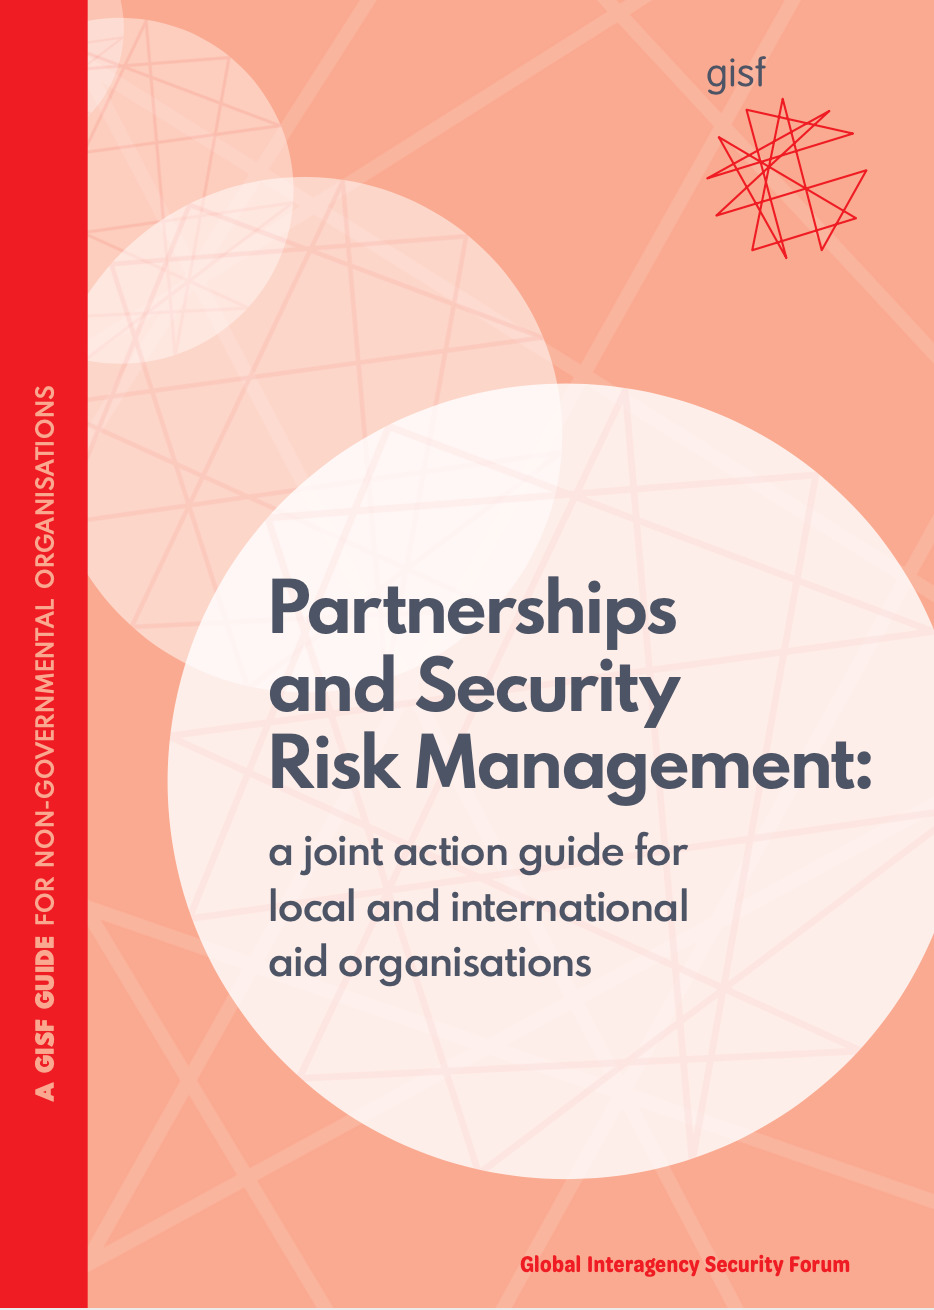 Partnerships and Security Risk Management: a joint action guide for local and international aid organisations